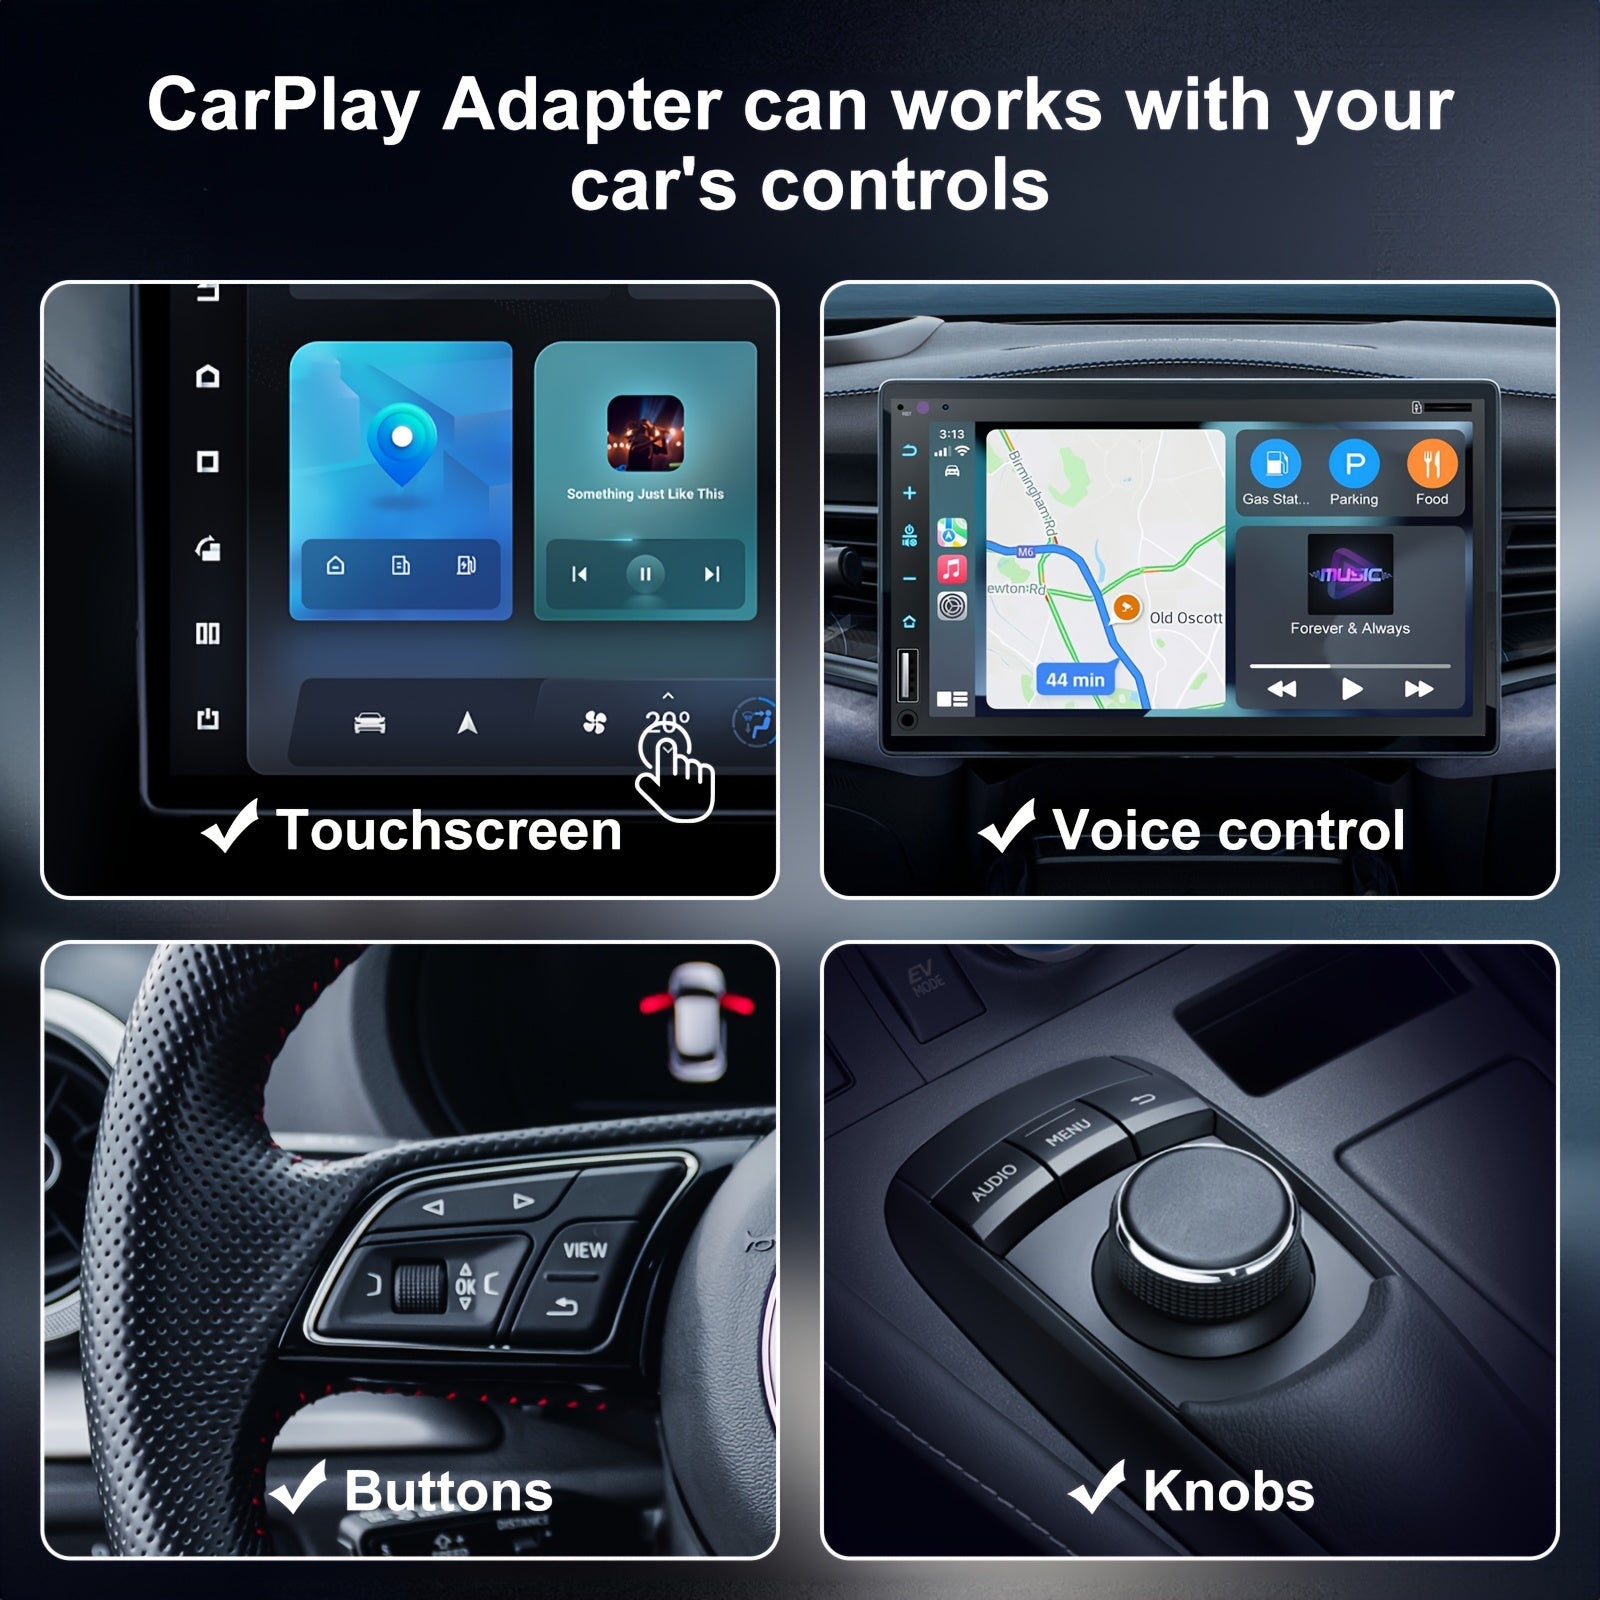  2-in-1 Wireless Apple CarPlay & Android Auto Wireless Adapter,  5.8 GHz Wireless AA Wireless Carplay Dongle for Wired Apple Carplay &  Android Car Converts Wired to Wireless Fast and Easy Use